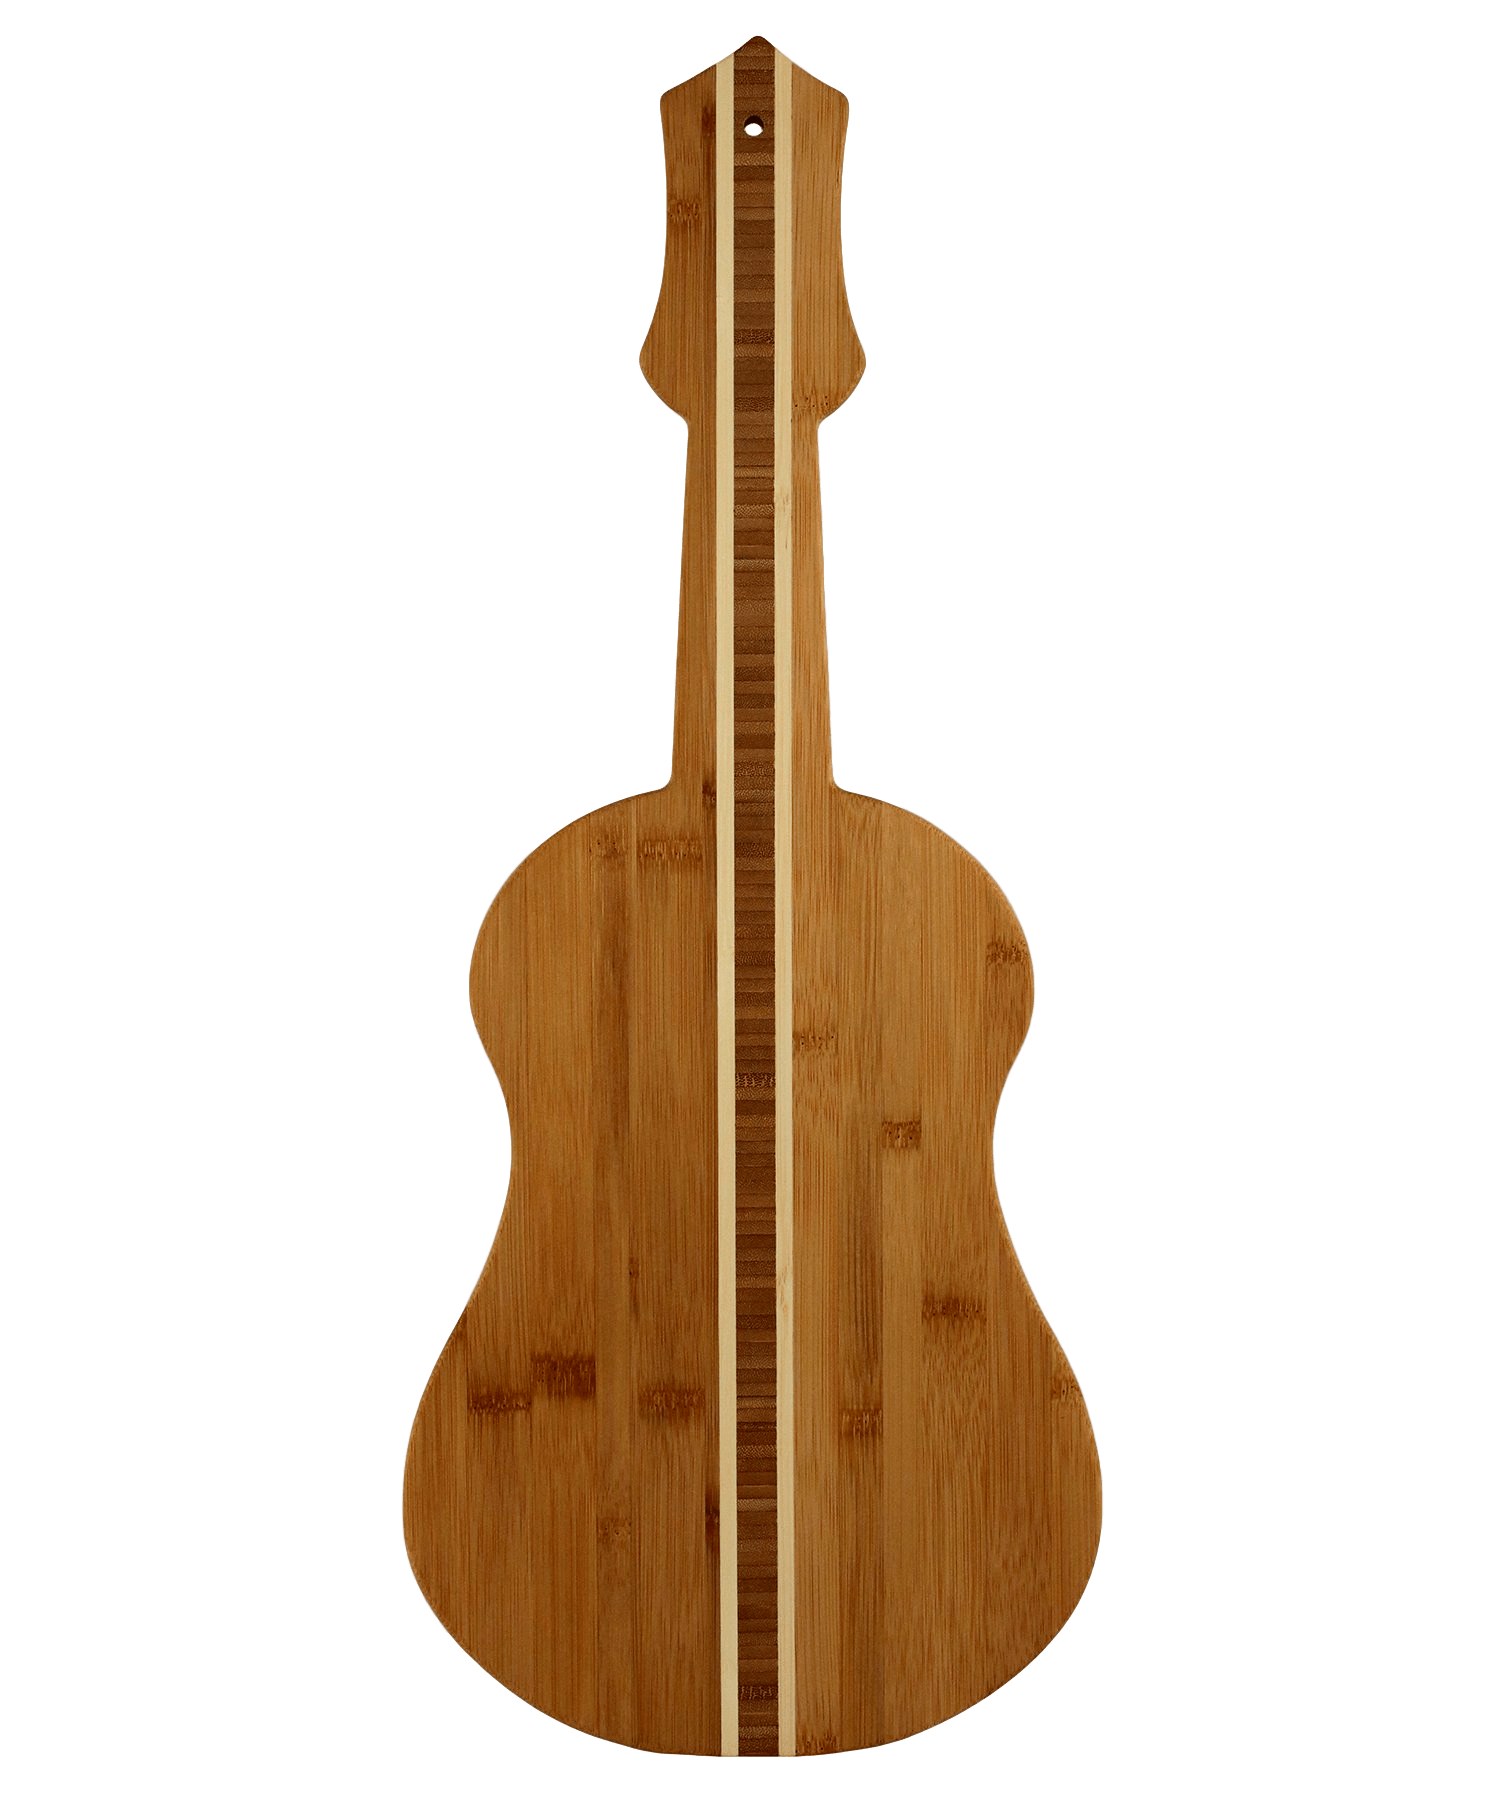 Ukulele/Guitar Bamboo Serving and Cutting Board | Laser Pics & Gifts